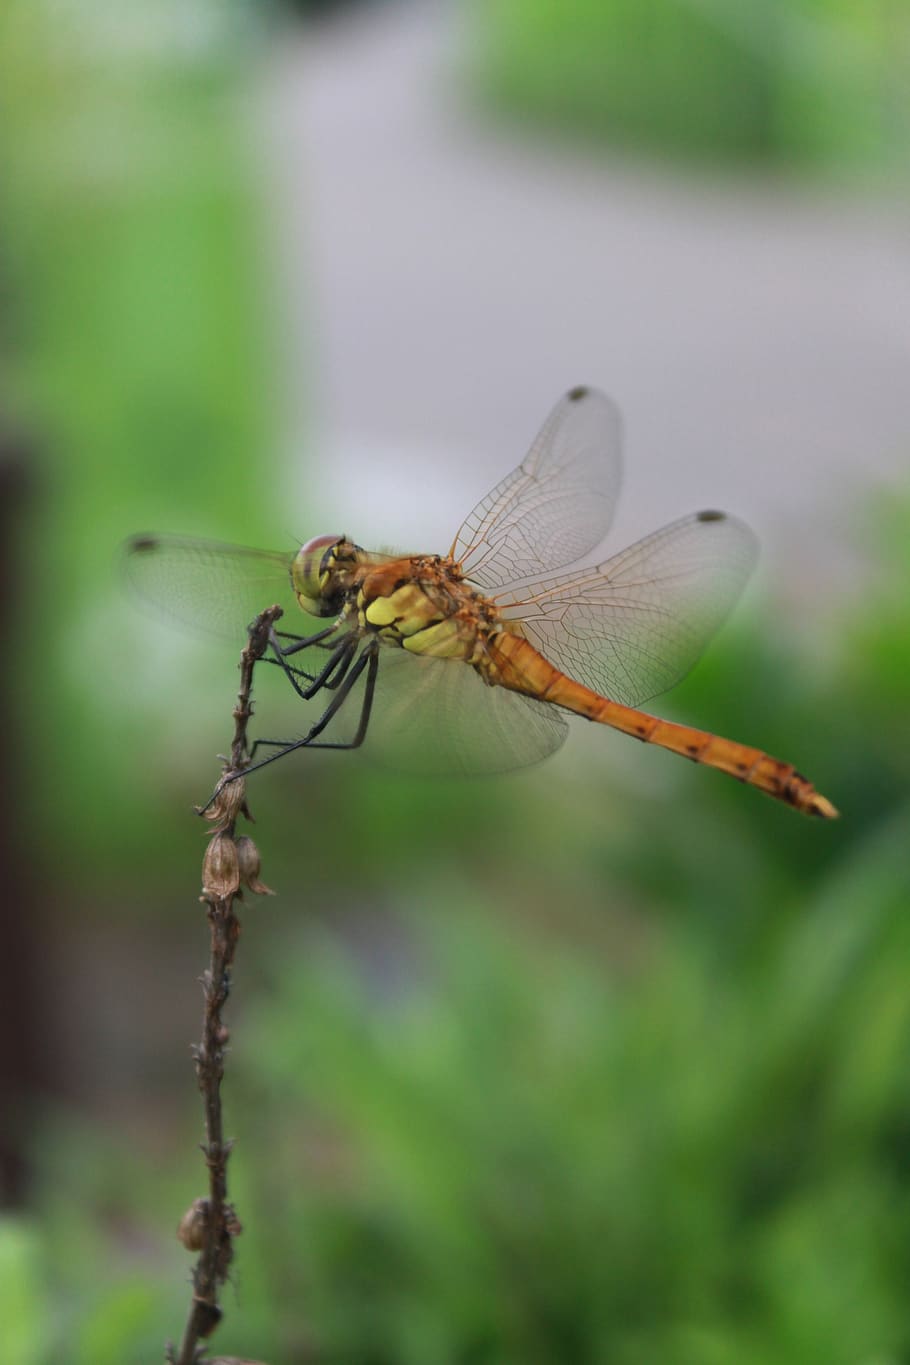 dragonfly, insects, nature, close, affix, wild, biology, outdoor, macro, invertebrate